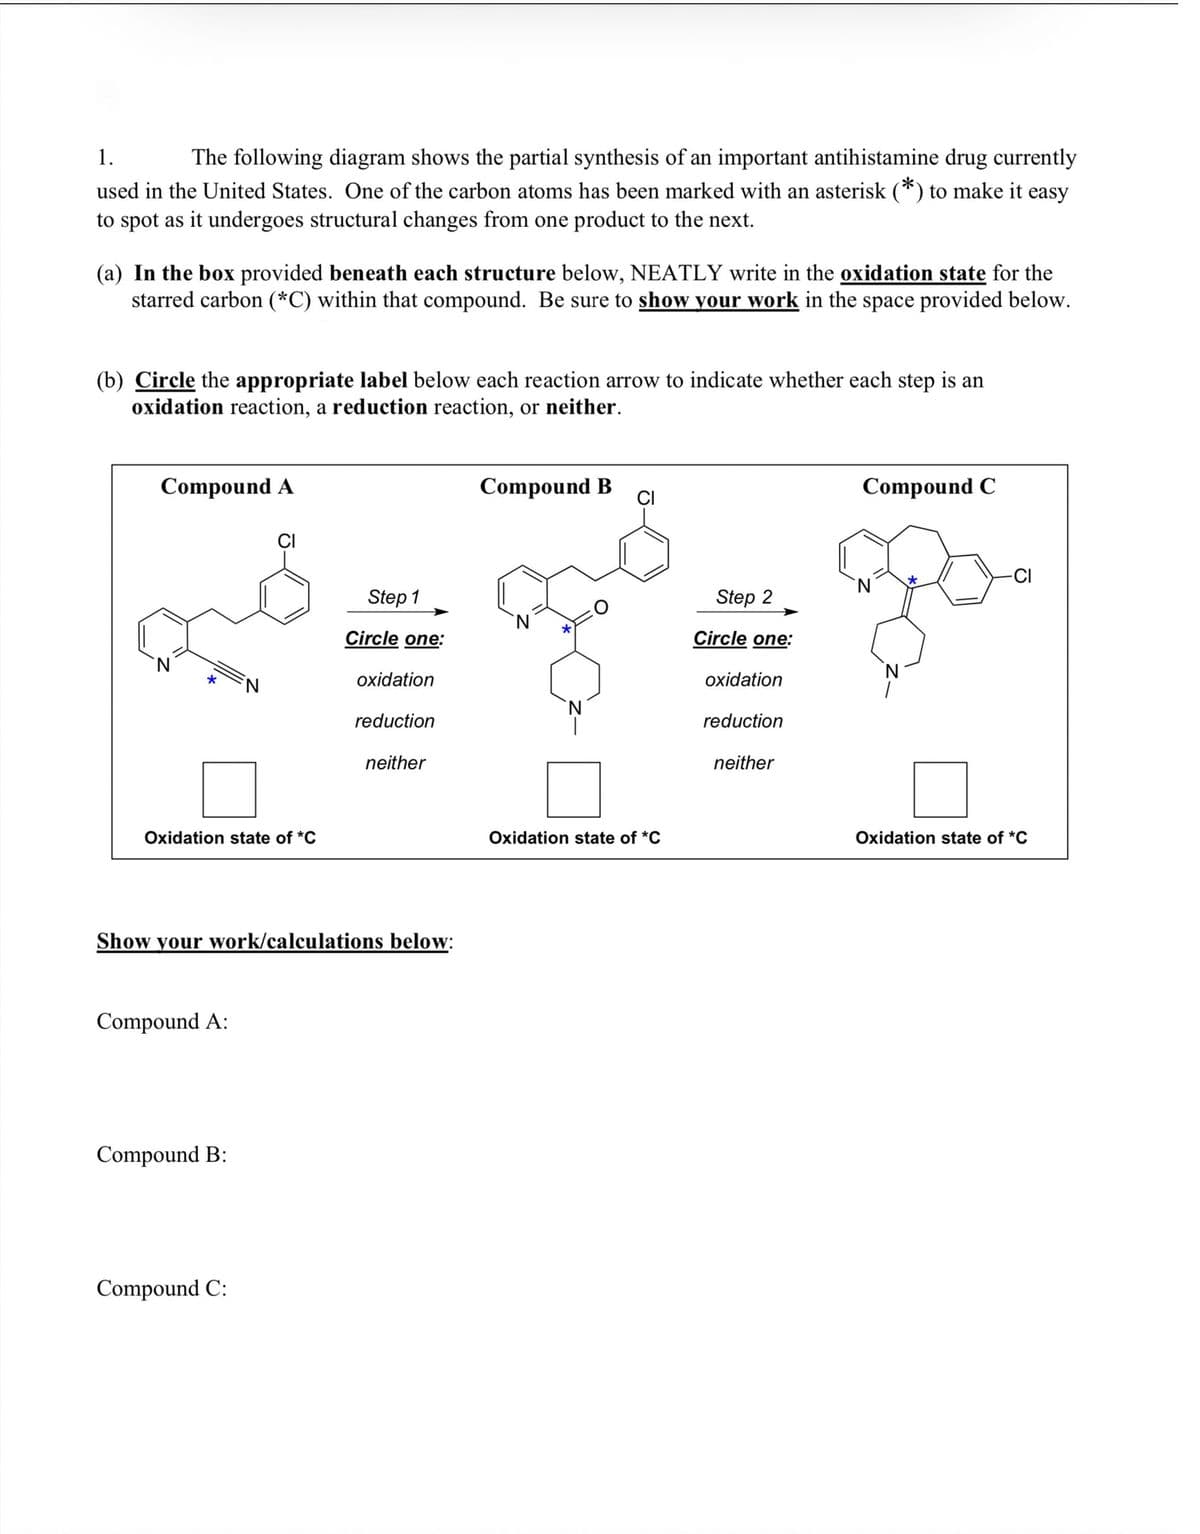 1.
The following diagram shows the partial synthesis of an important antihistamine drug currently
used in the United States. One of the carbon atoms has been marked with an asterisk (*) to make it easy
to spot as it undergoes structural changes from one product to the next.
(a) In the box provided beneath each structure below, NEATLY write in the oxidation state for the
starred carbon (*C) within that compound. Be sure to show your work in the space provided below.
(b) Circle the appropriate label below each reaction arrow to indicate whether each step is an
oxidation reaction, a reduction reaction, or neither.
Compound A
Compound B
Compound C
CI
CI
-CI
N.
Step 1
Step 2
Circle one:
Circle one:
N.
oxidation
oxidation
reduction
reduction
neither
neither
Oxidation state of *C
Oxidation state of *C
Oxidation state of *C
Show your work/calculations below:
Compound A:
Compound B:
Compound C:
